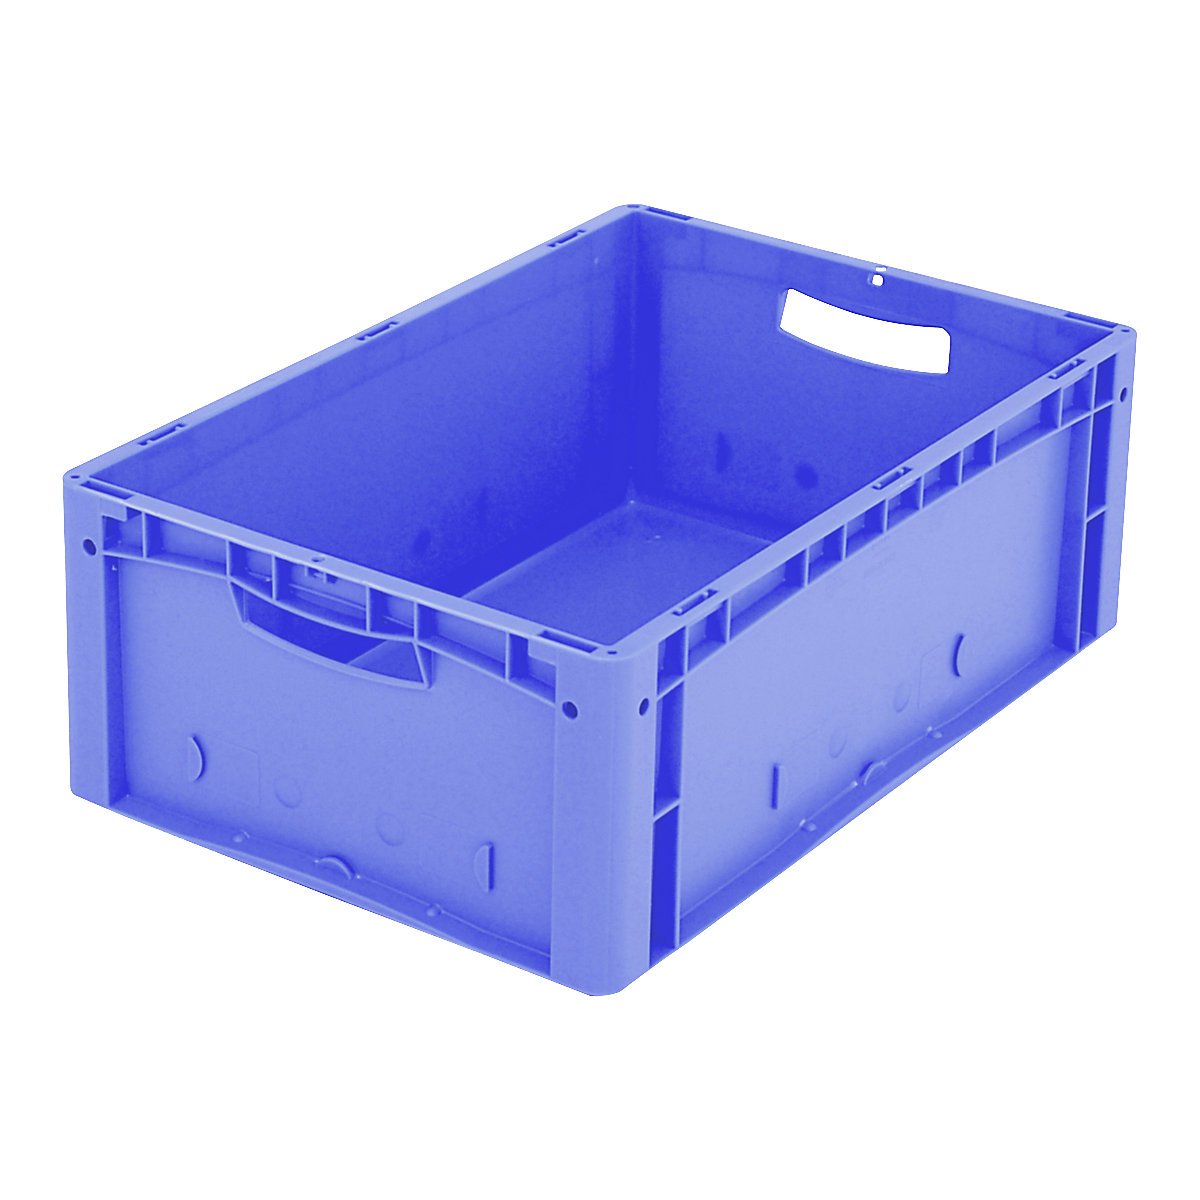 XL Euro stacking container – BITO, standard model, LxWxH 600 x 400 x 220 mm-11